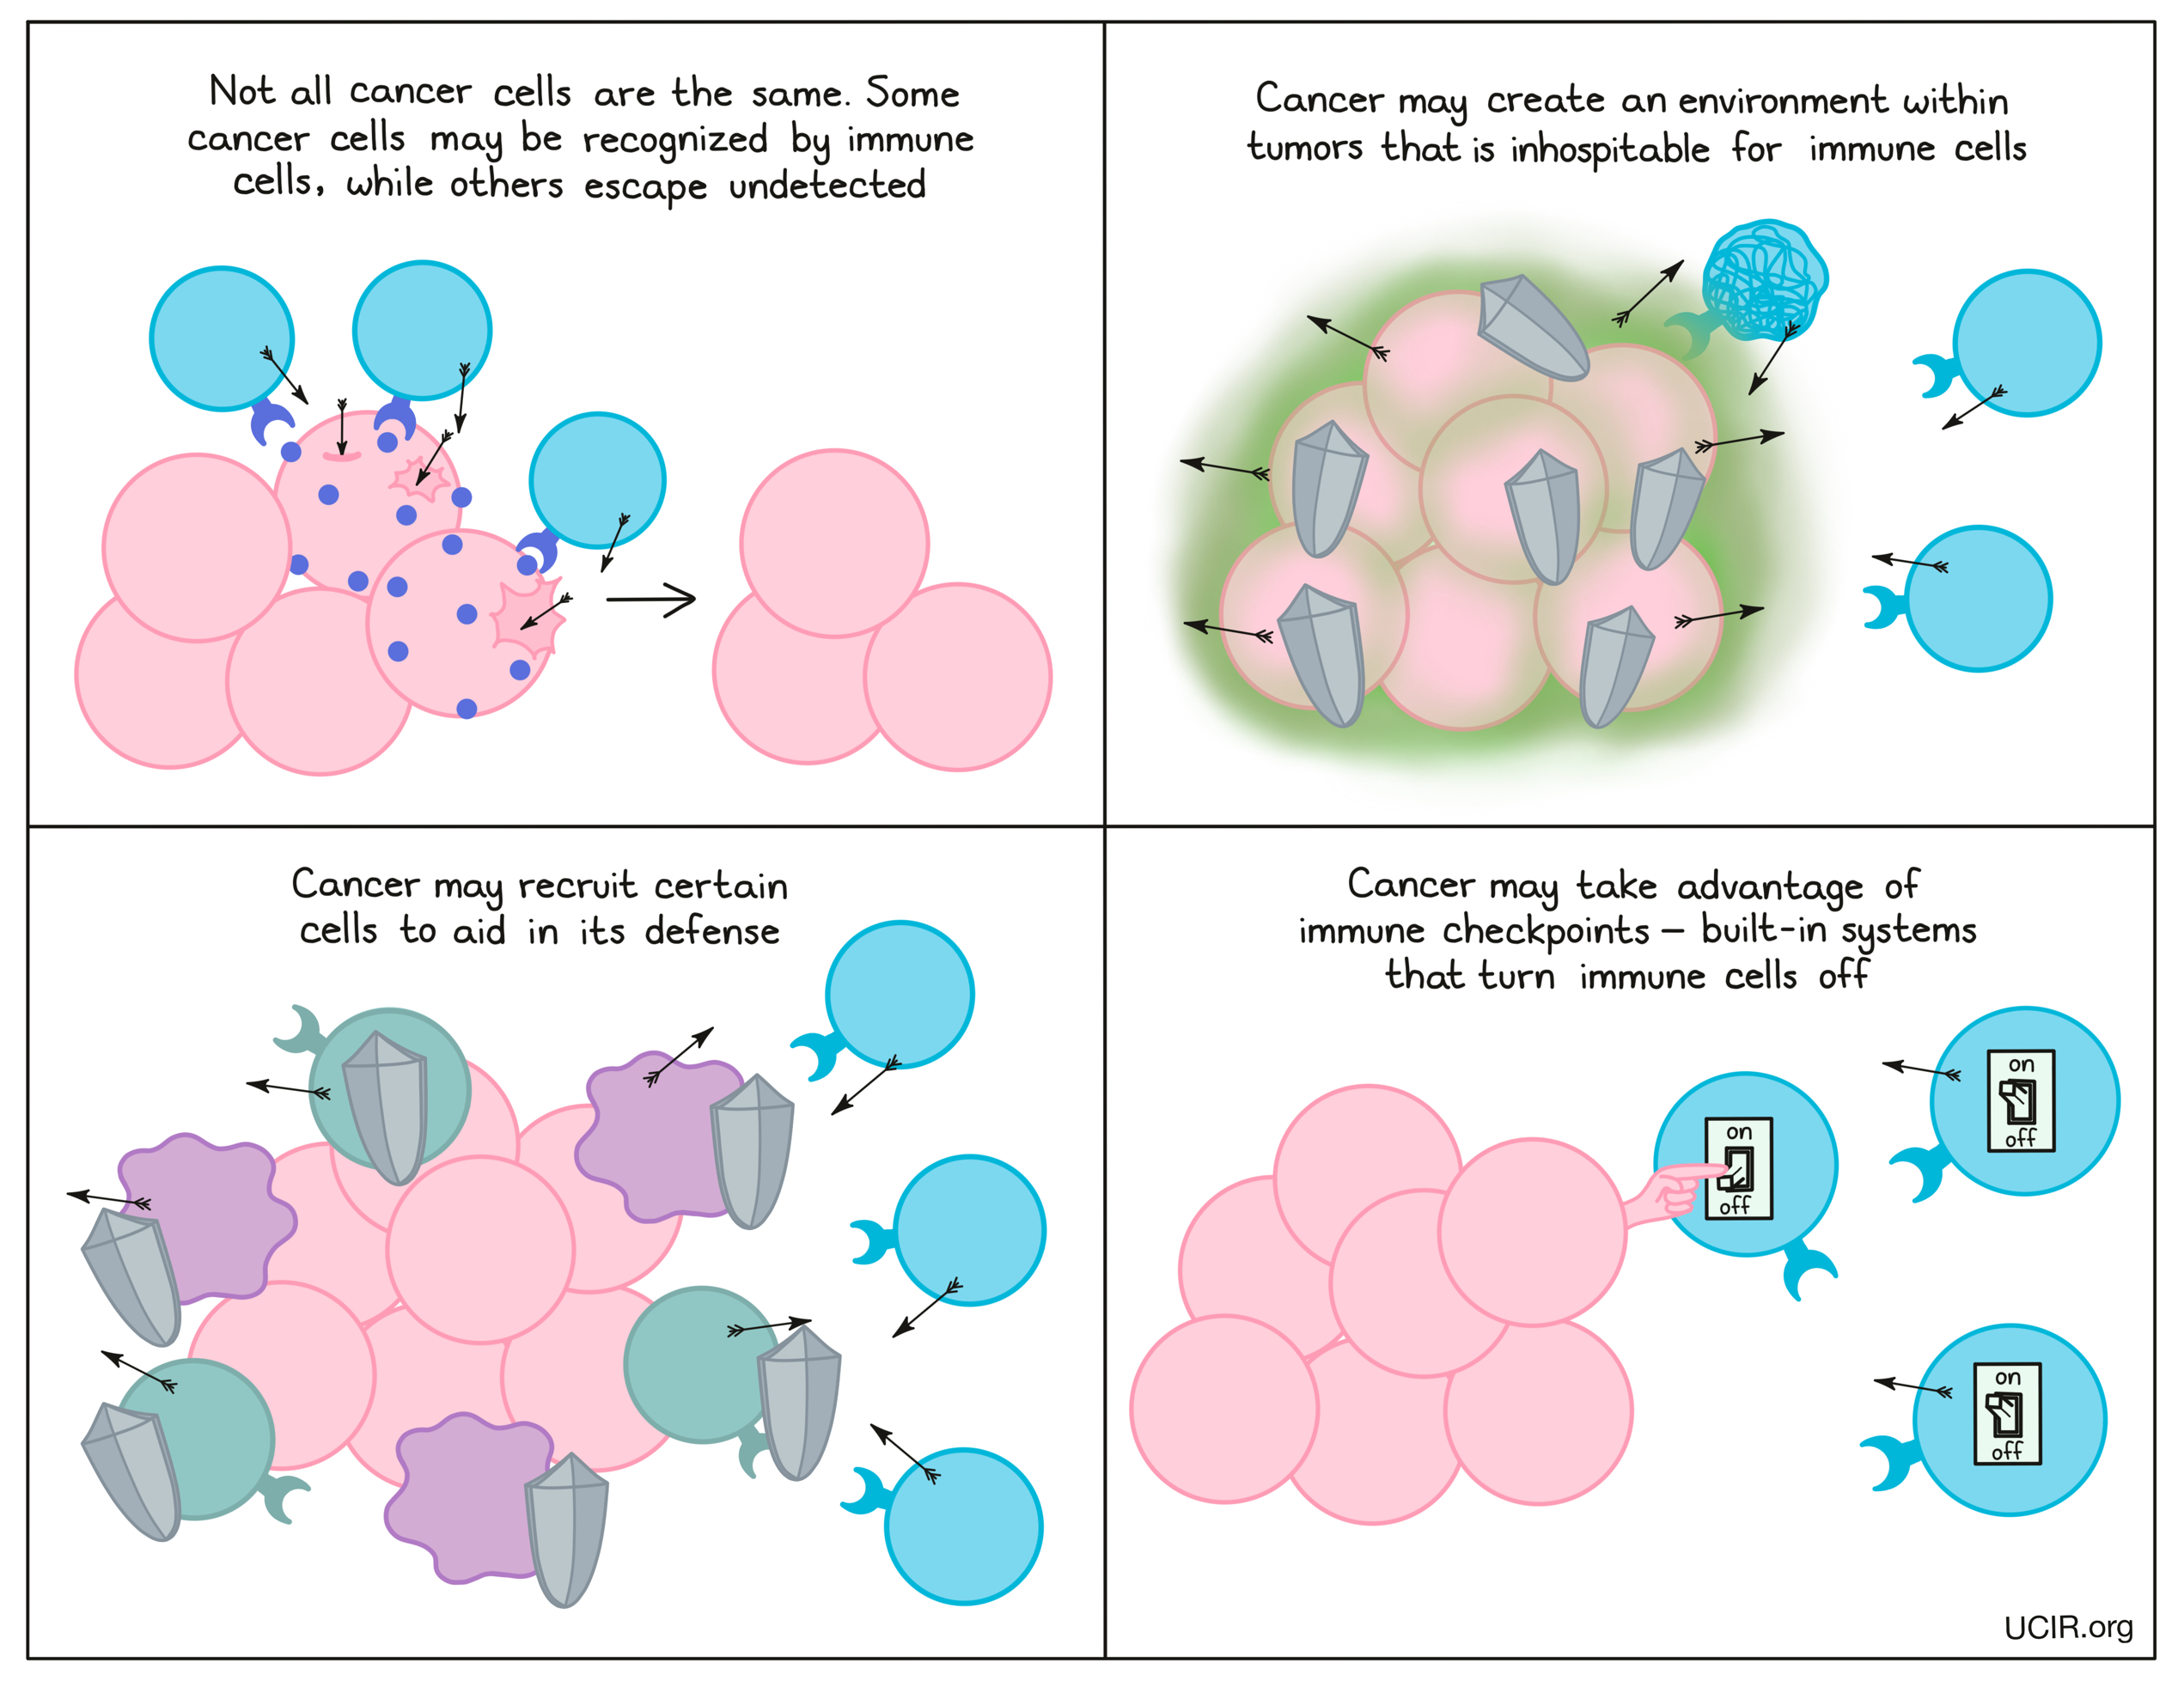 Depiction of the ways that cancer cells subvert immune system responses.